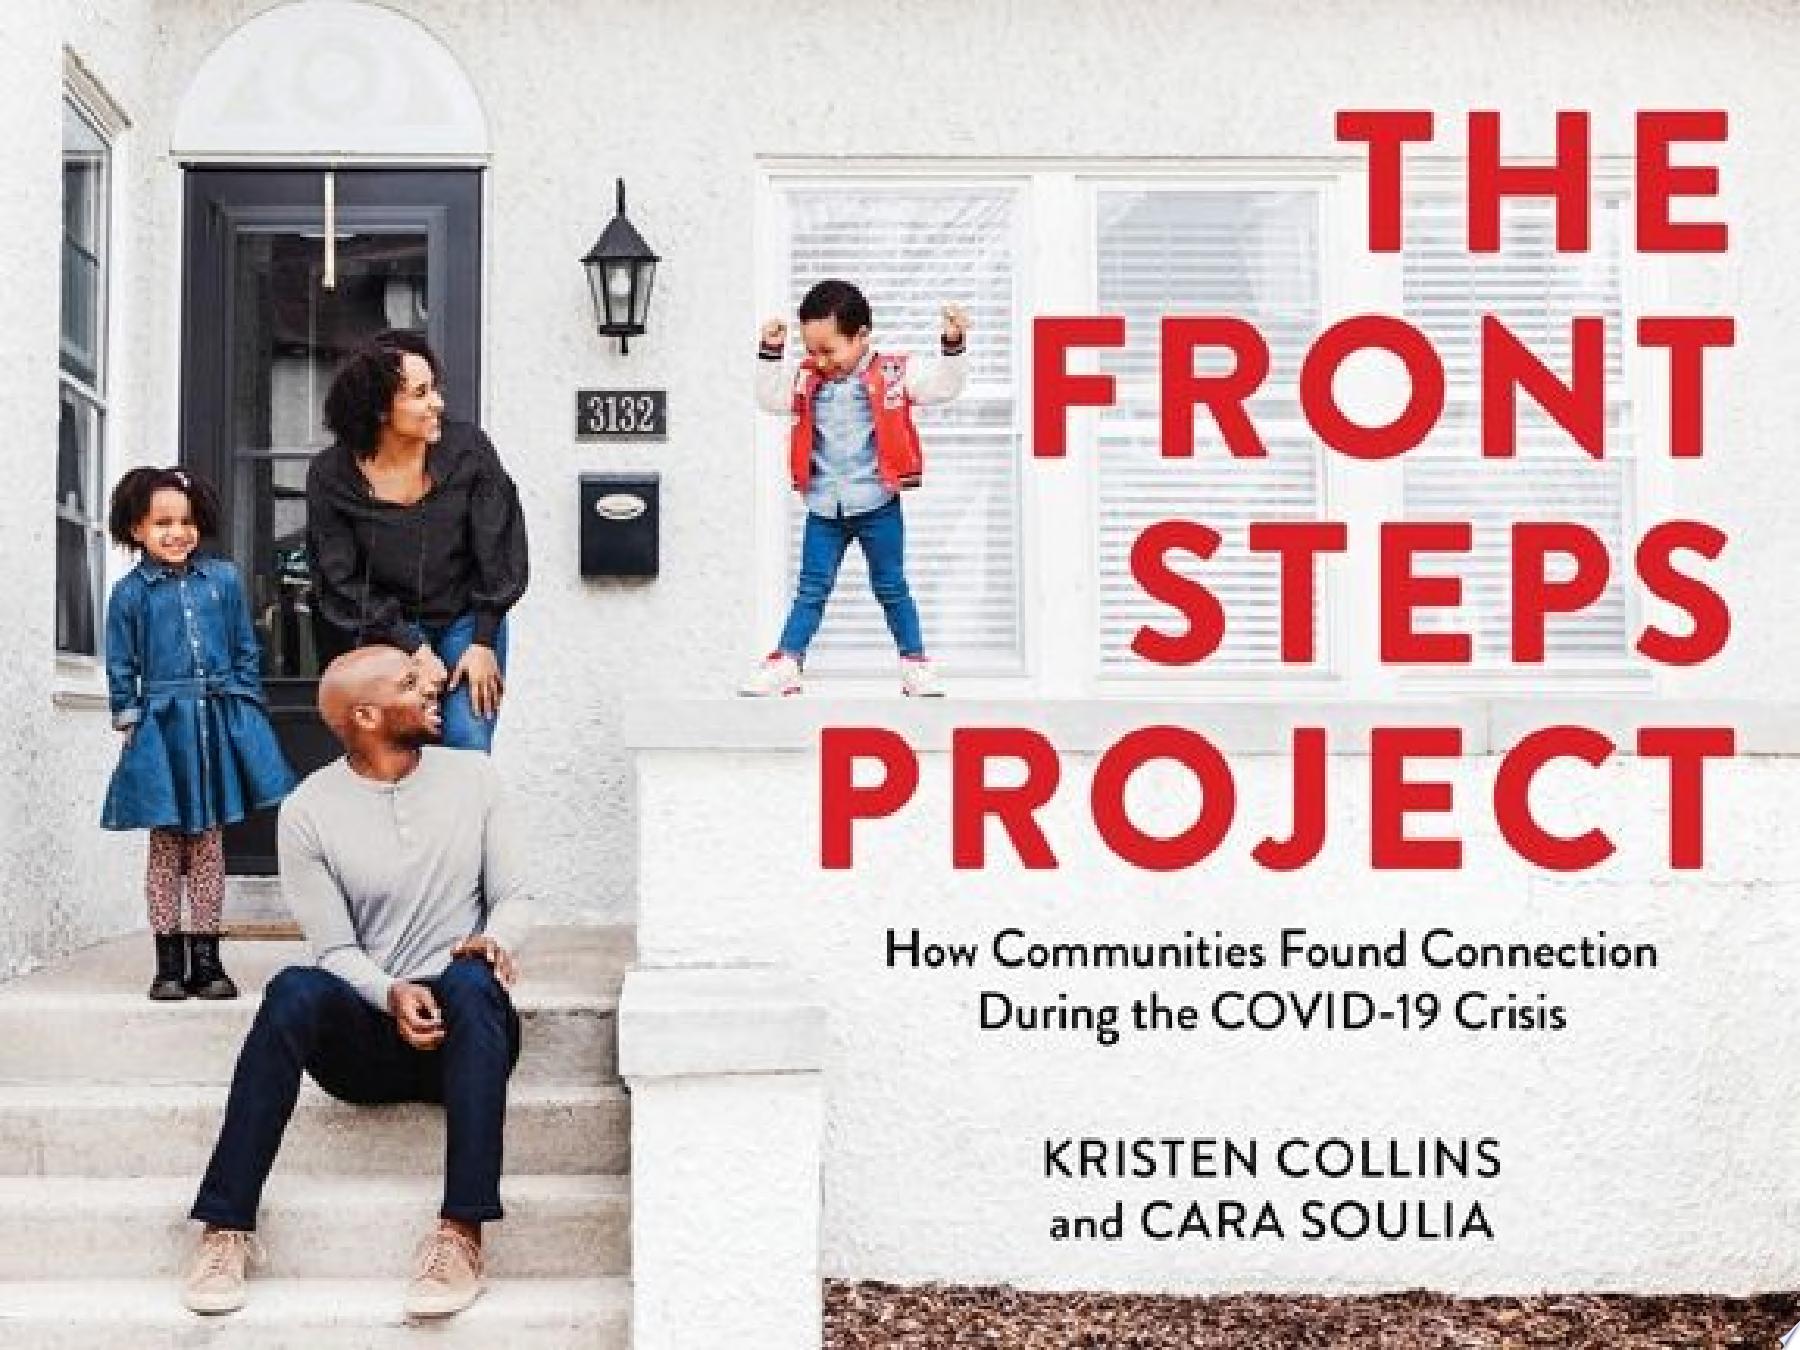 Image for "The Front Steps Project"